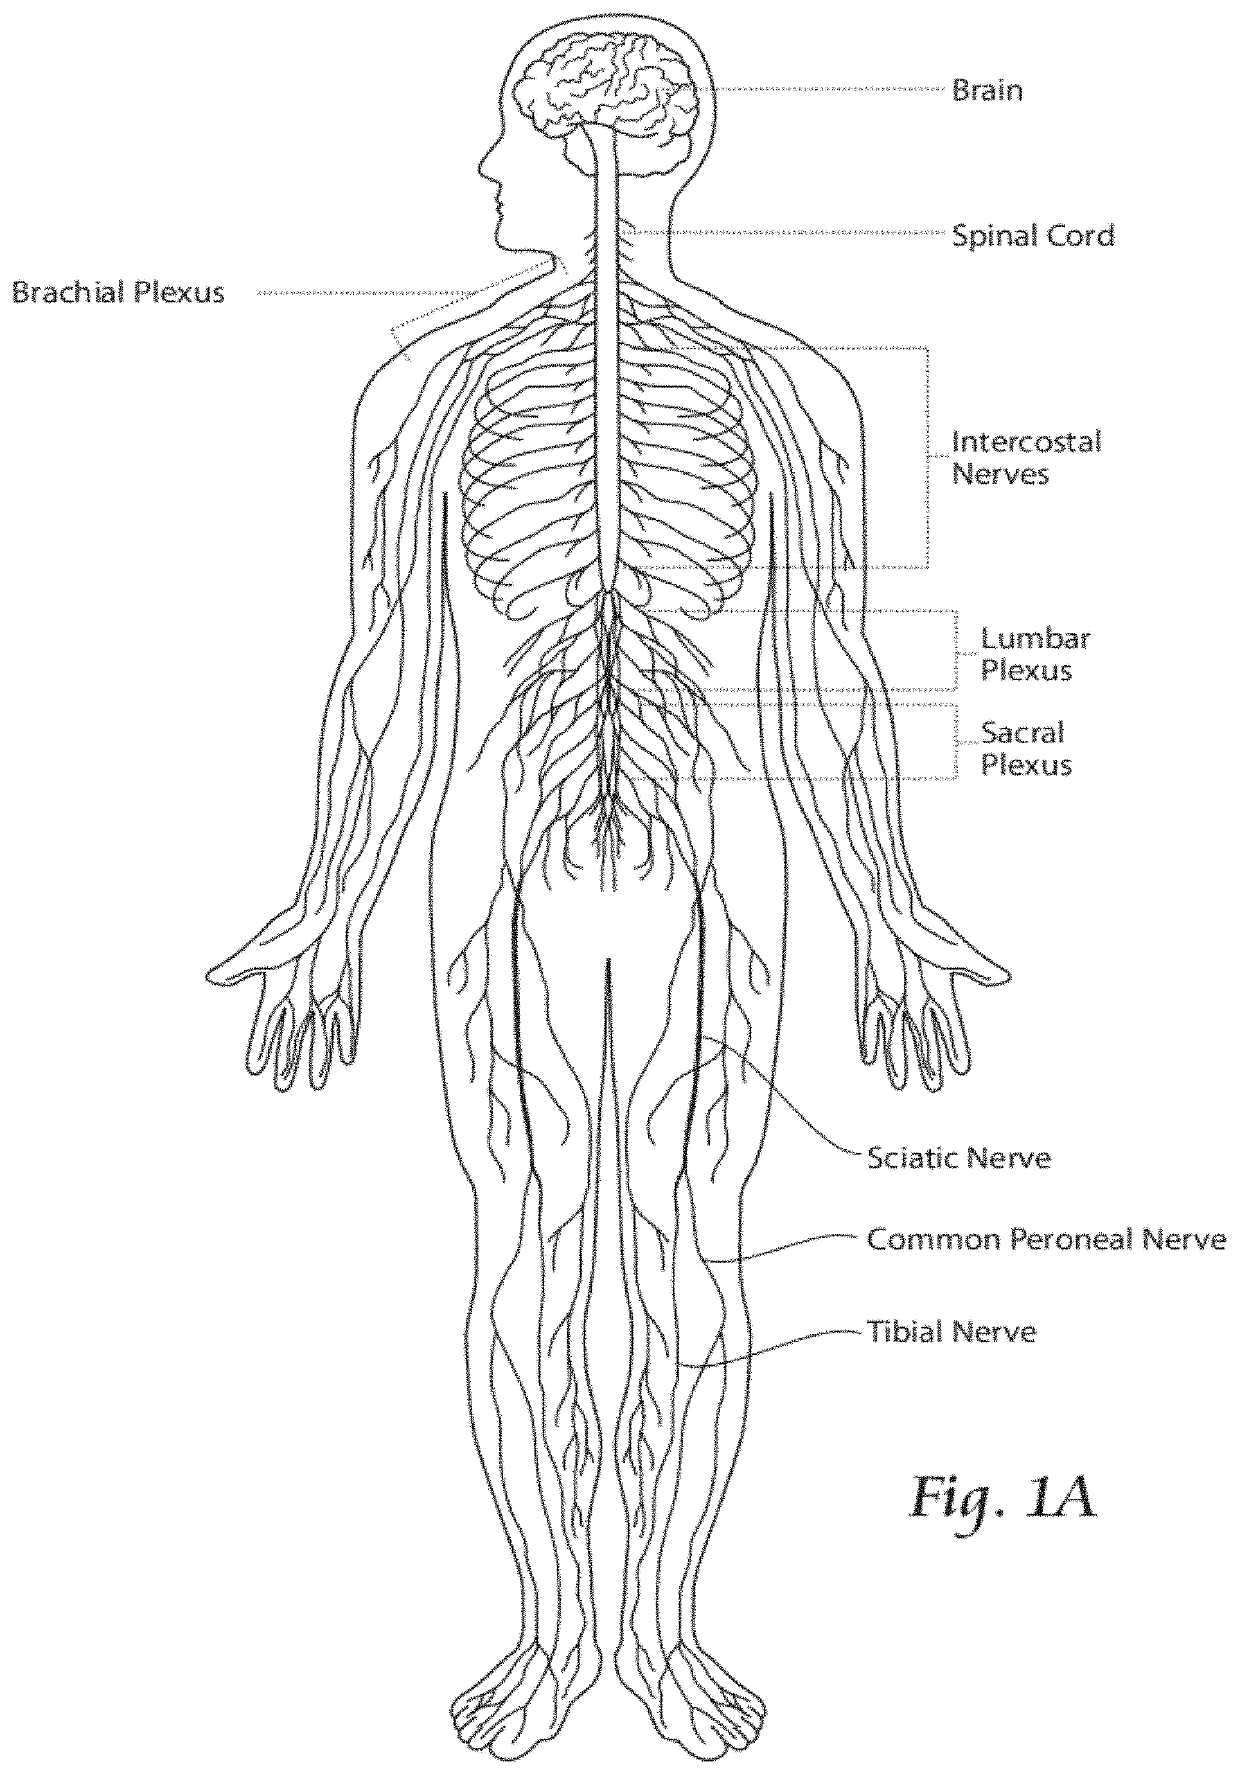 Systems and methods to place one or more leads in tissue to electrically stimulate nerves to treat pain